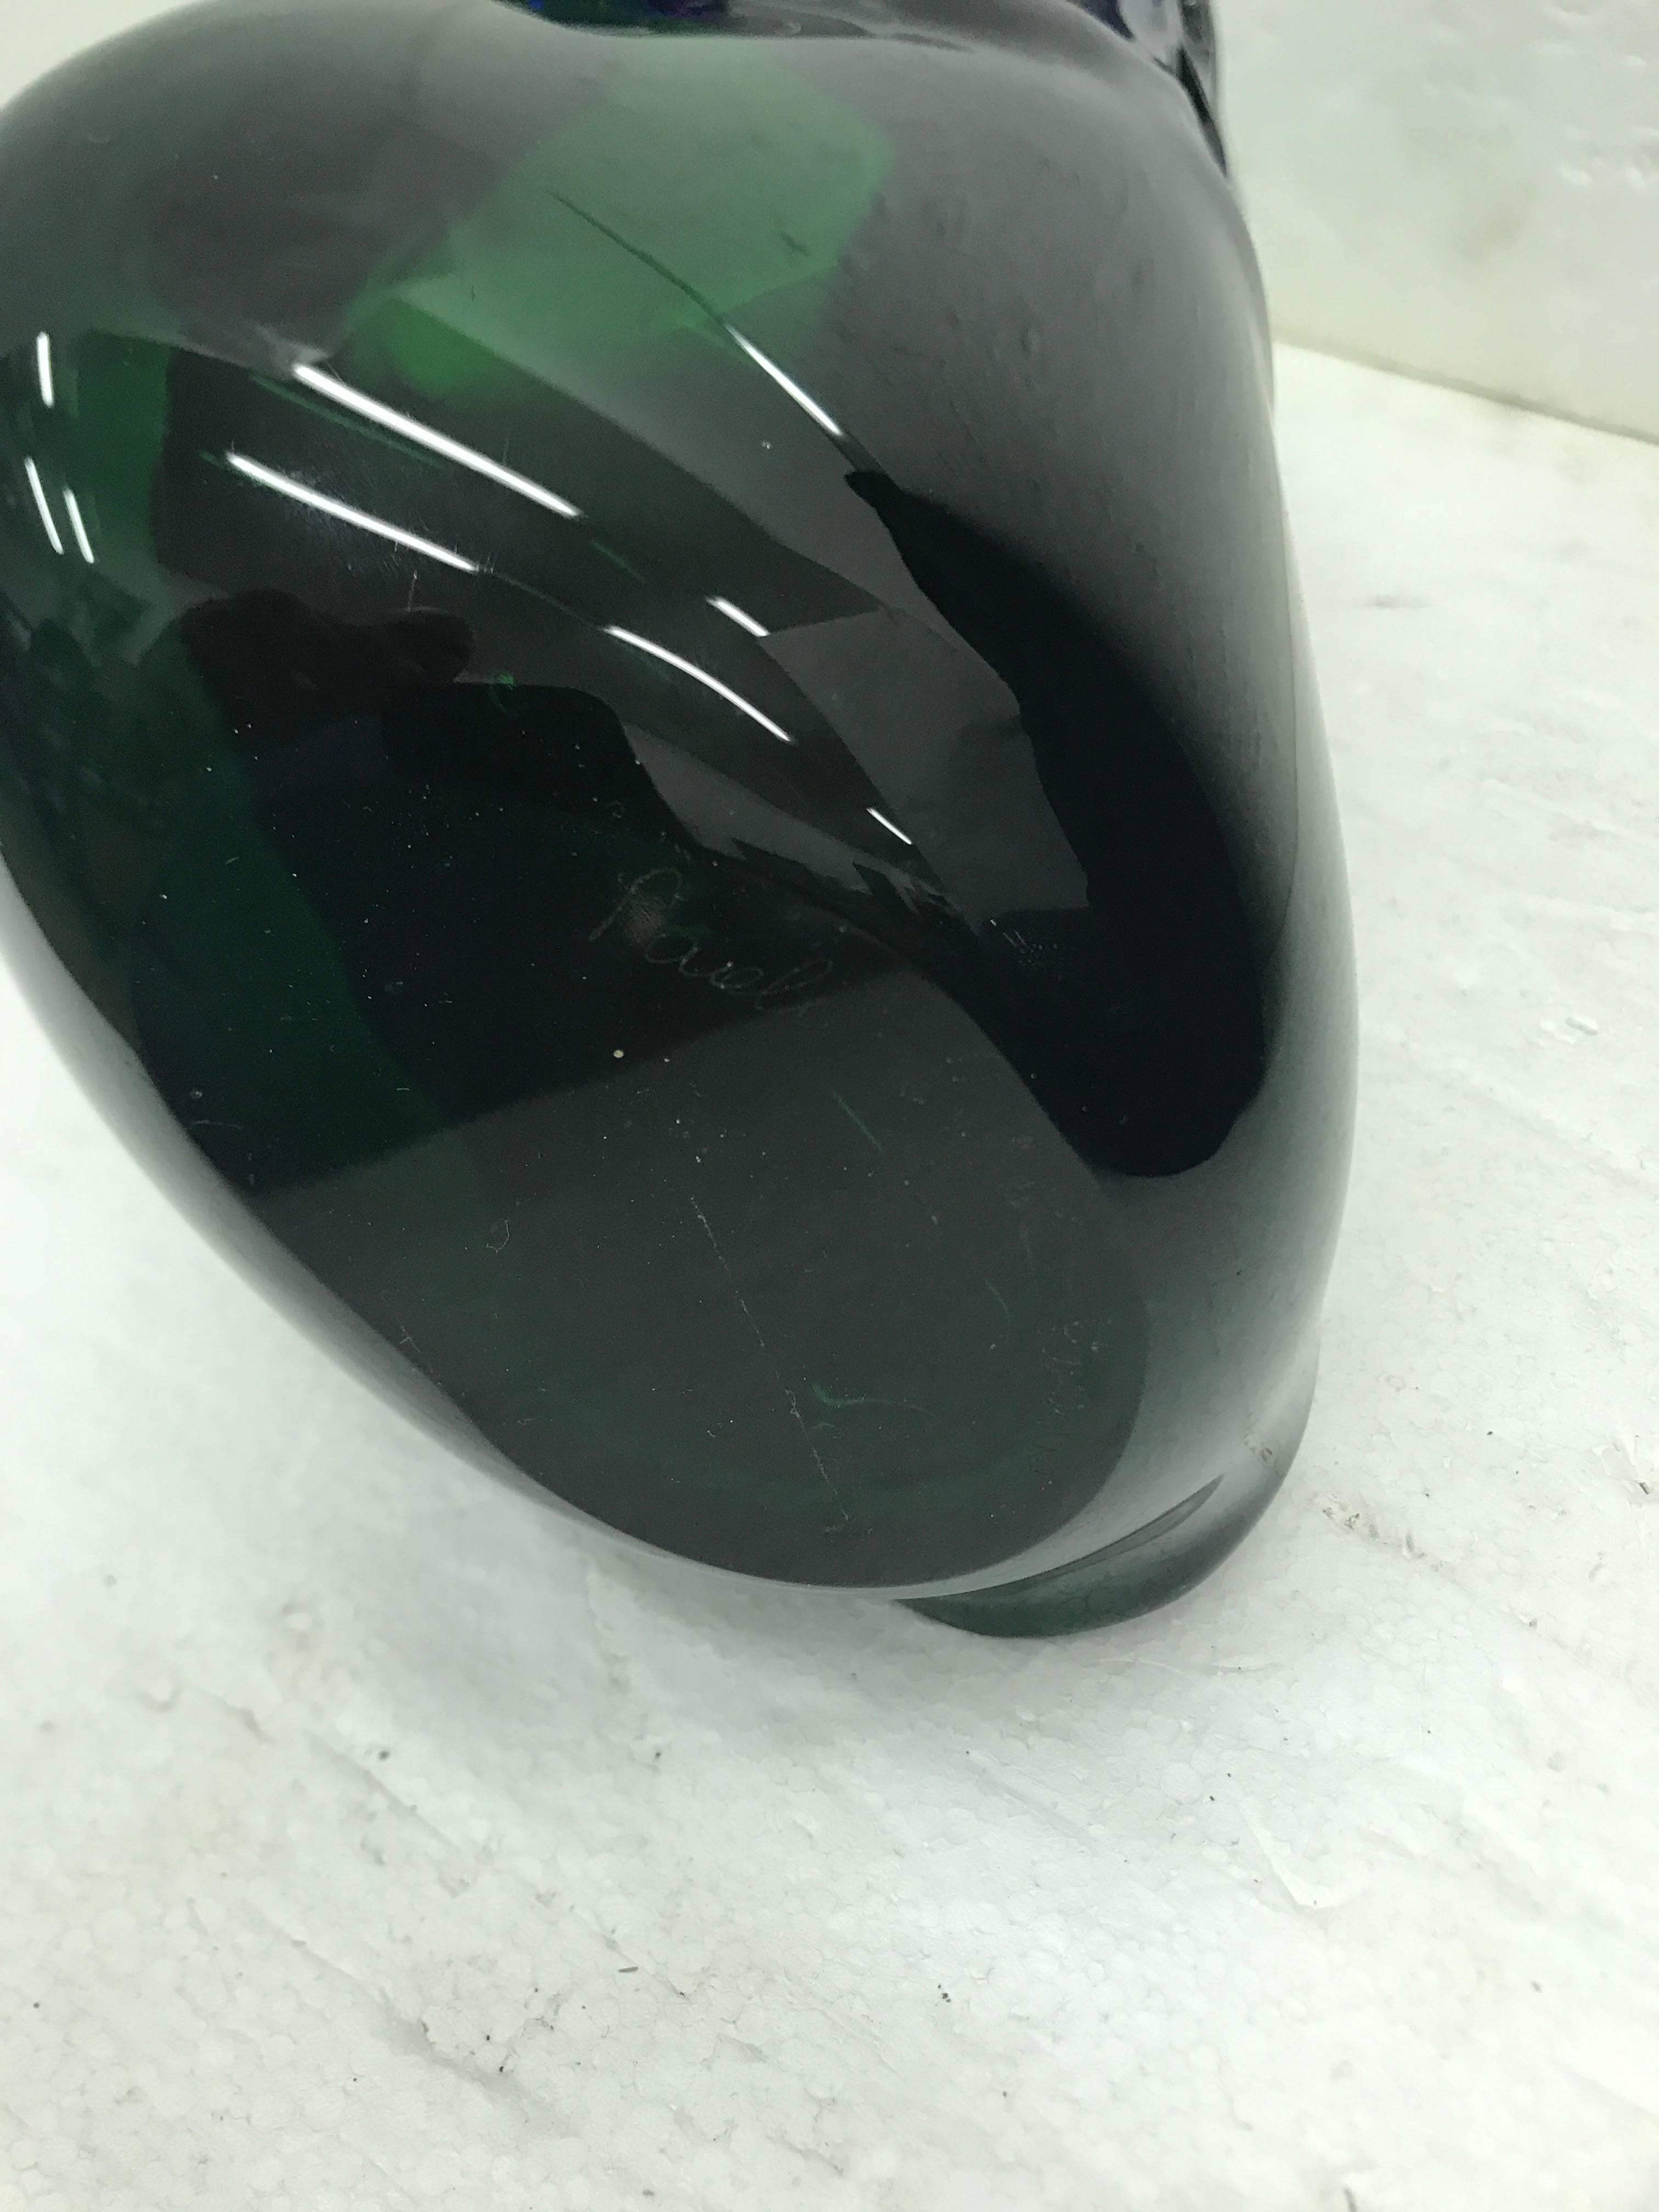 Modern Unique Blue and Green Murano Glass Vase by Paolo Crepax, circa 1990